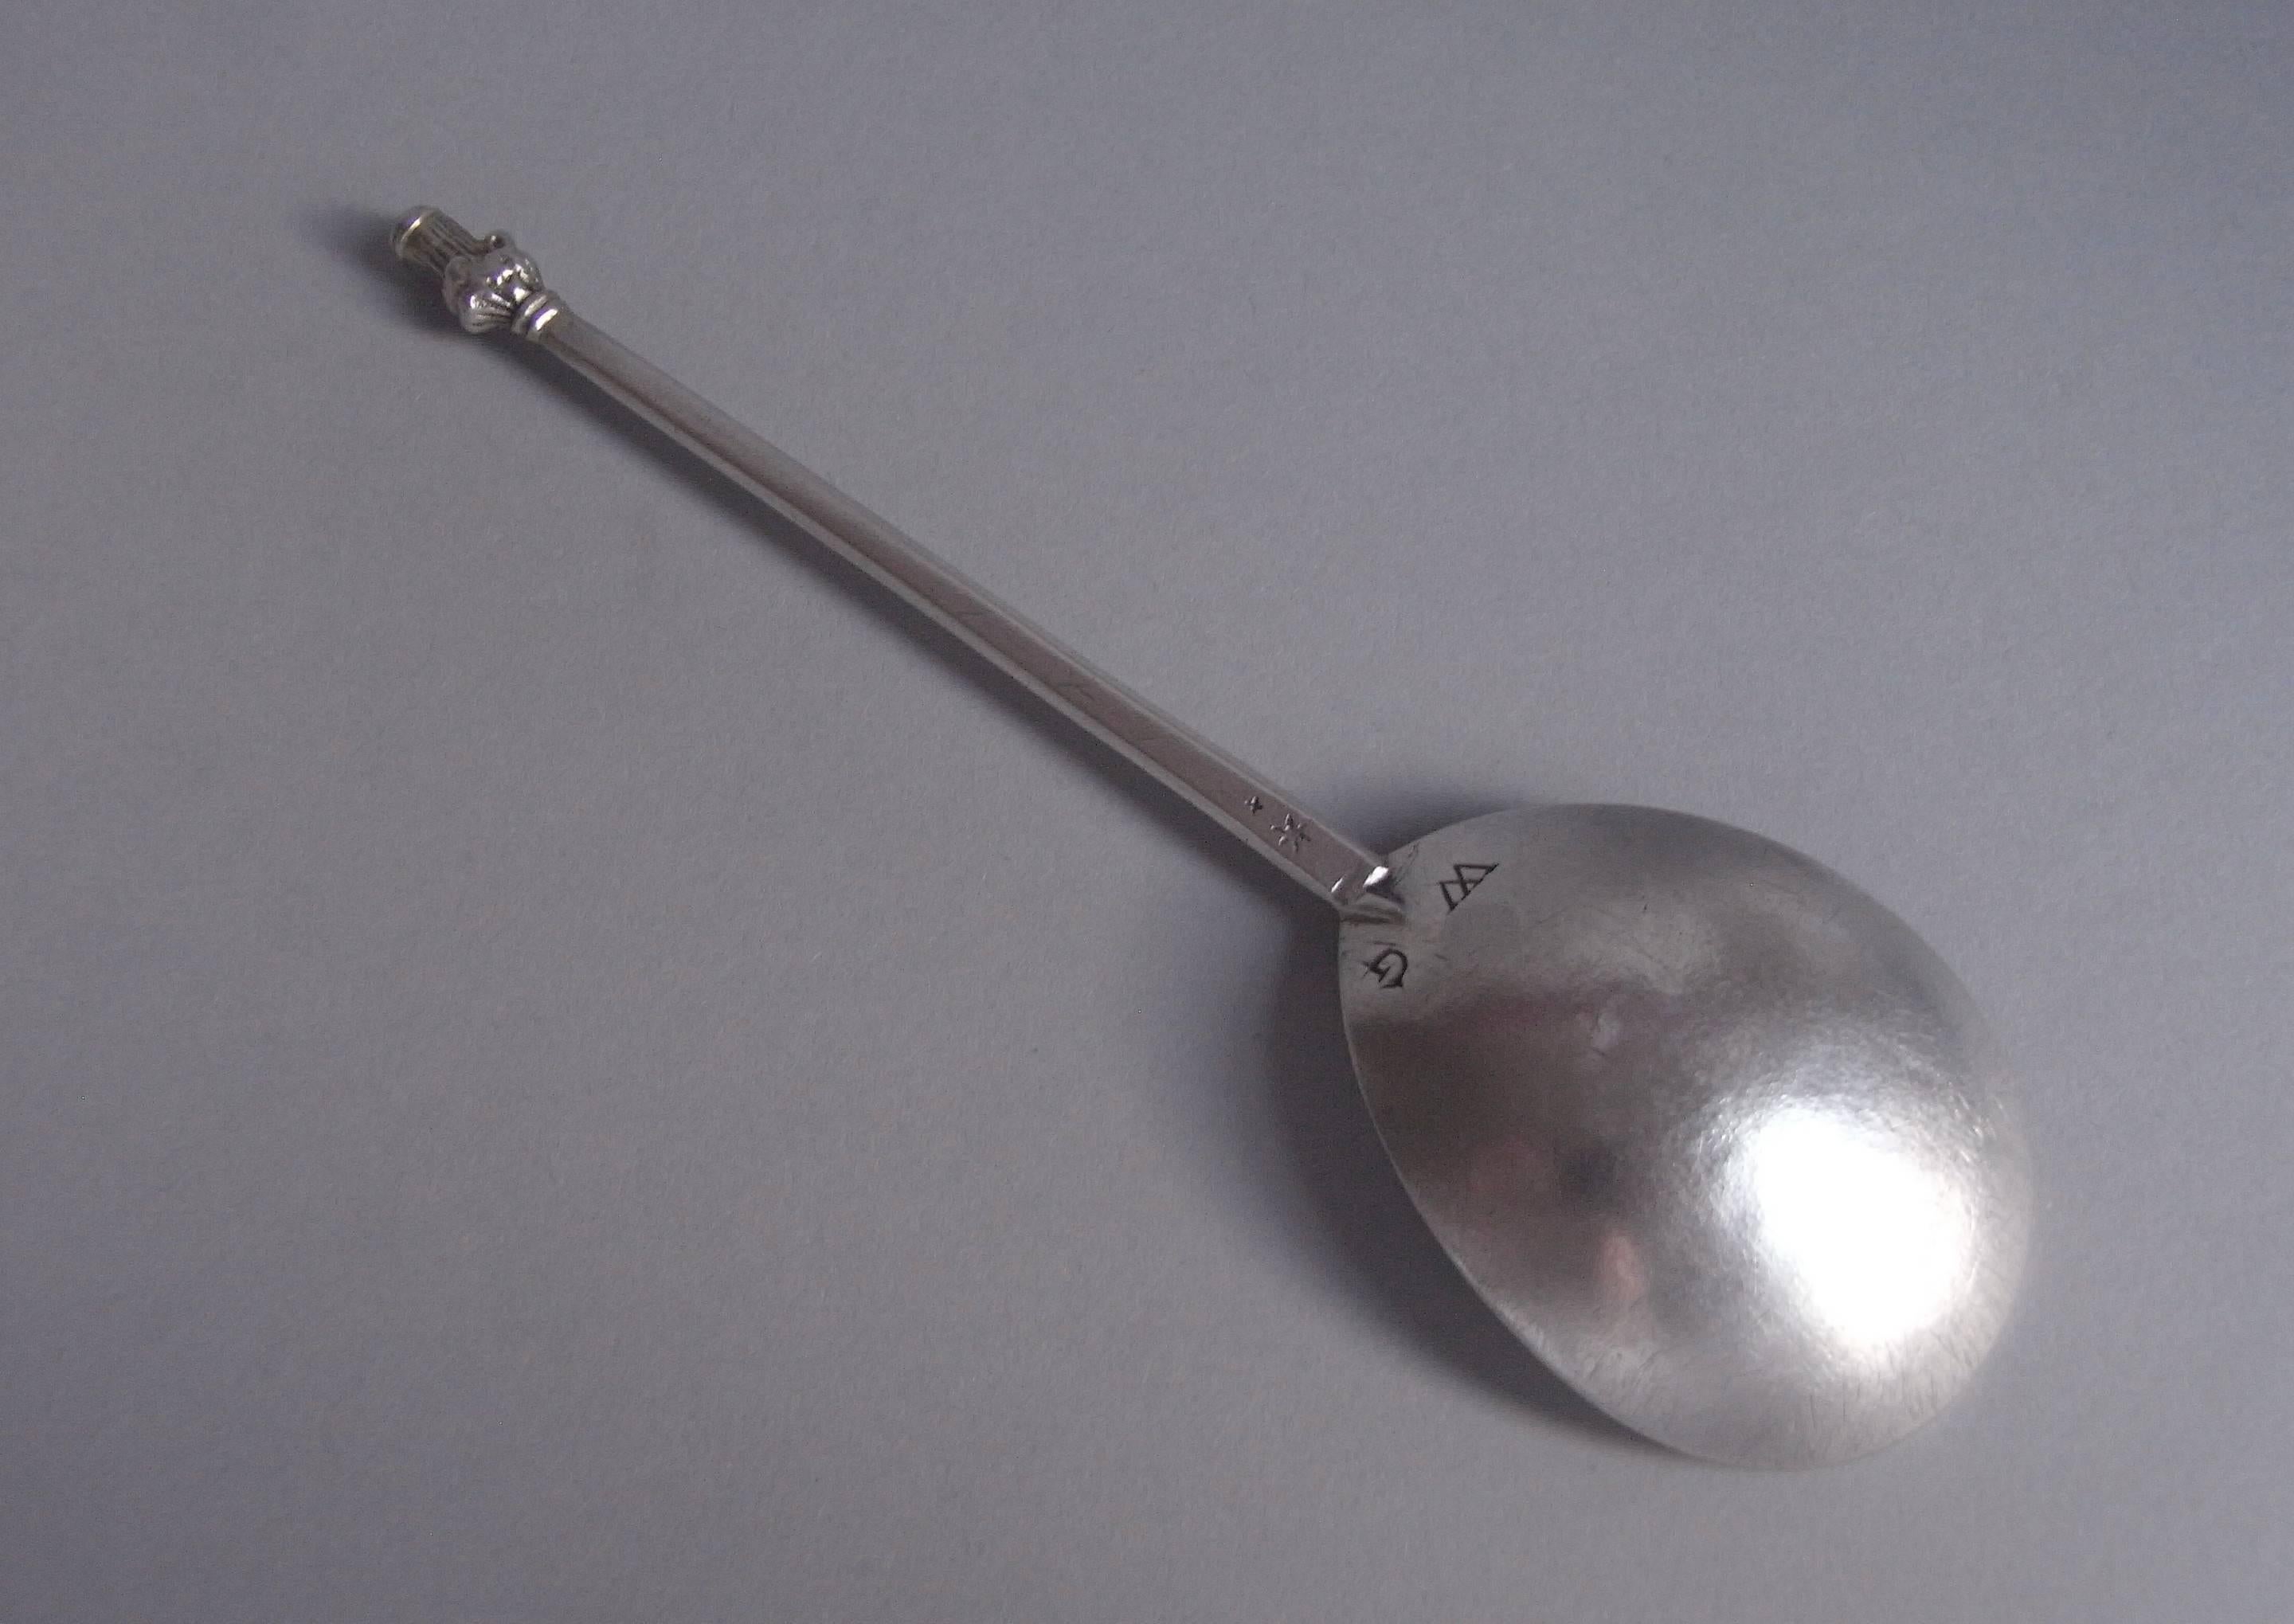 The Spoon has a fig shaped bowl and faceted octagonal stem. The top of the stem terminates in a finely detailed cast Maidenhead finial, which is palely gilded. The reverse of the bowl is scratch engraved with the contemporary initials WG. The Spoon